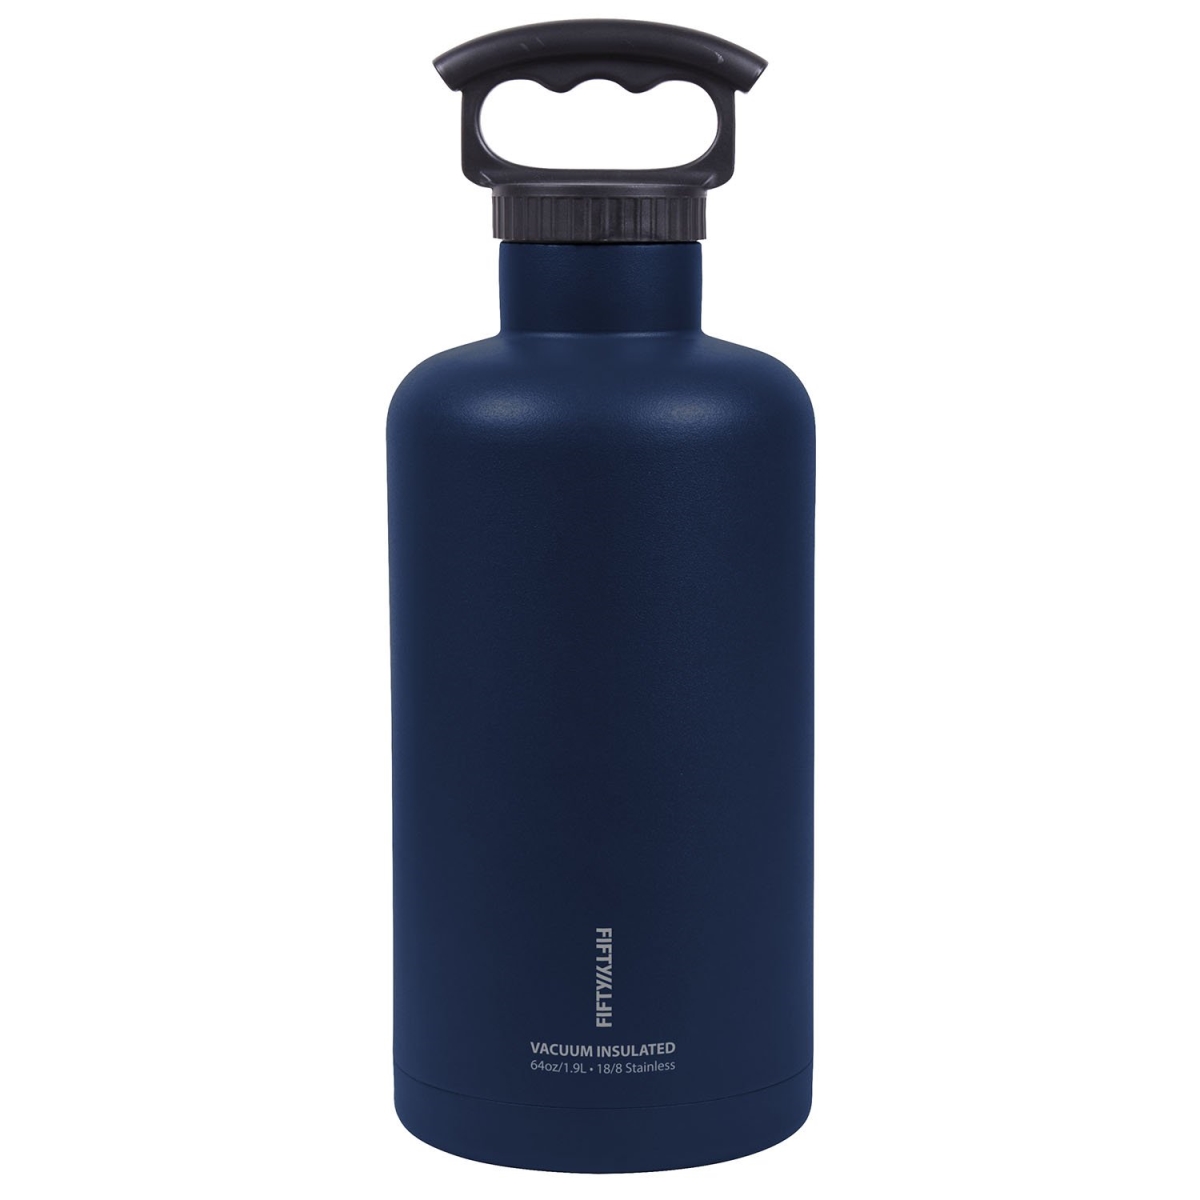 V65001nb0 64 Oz Double-wall Vacuum-insulated Growlers With 3 Finger Grip Cap, Navy Blue